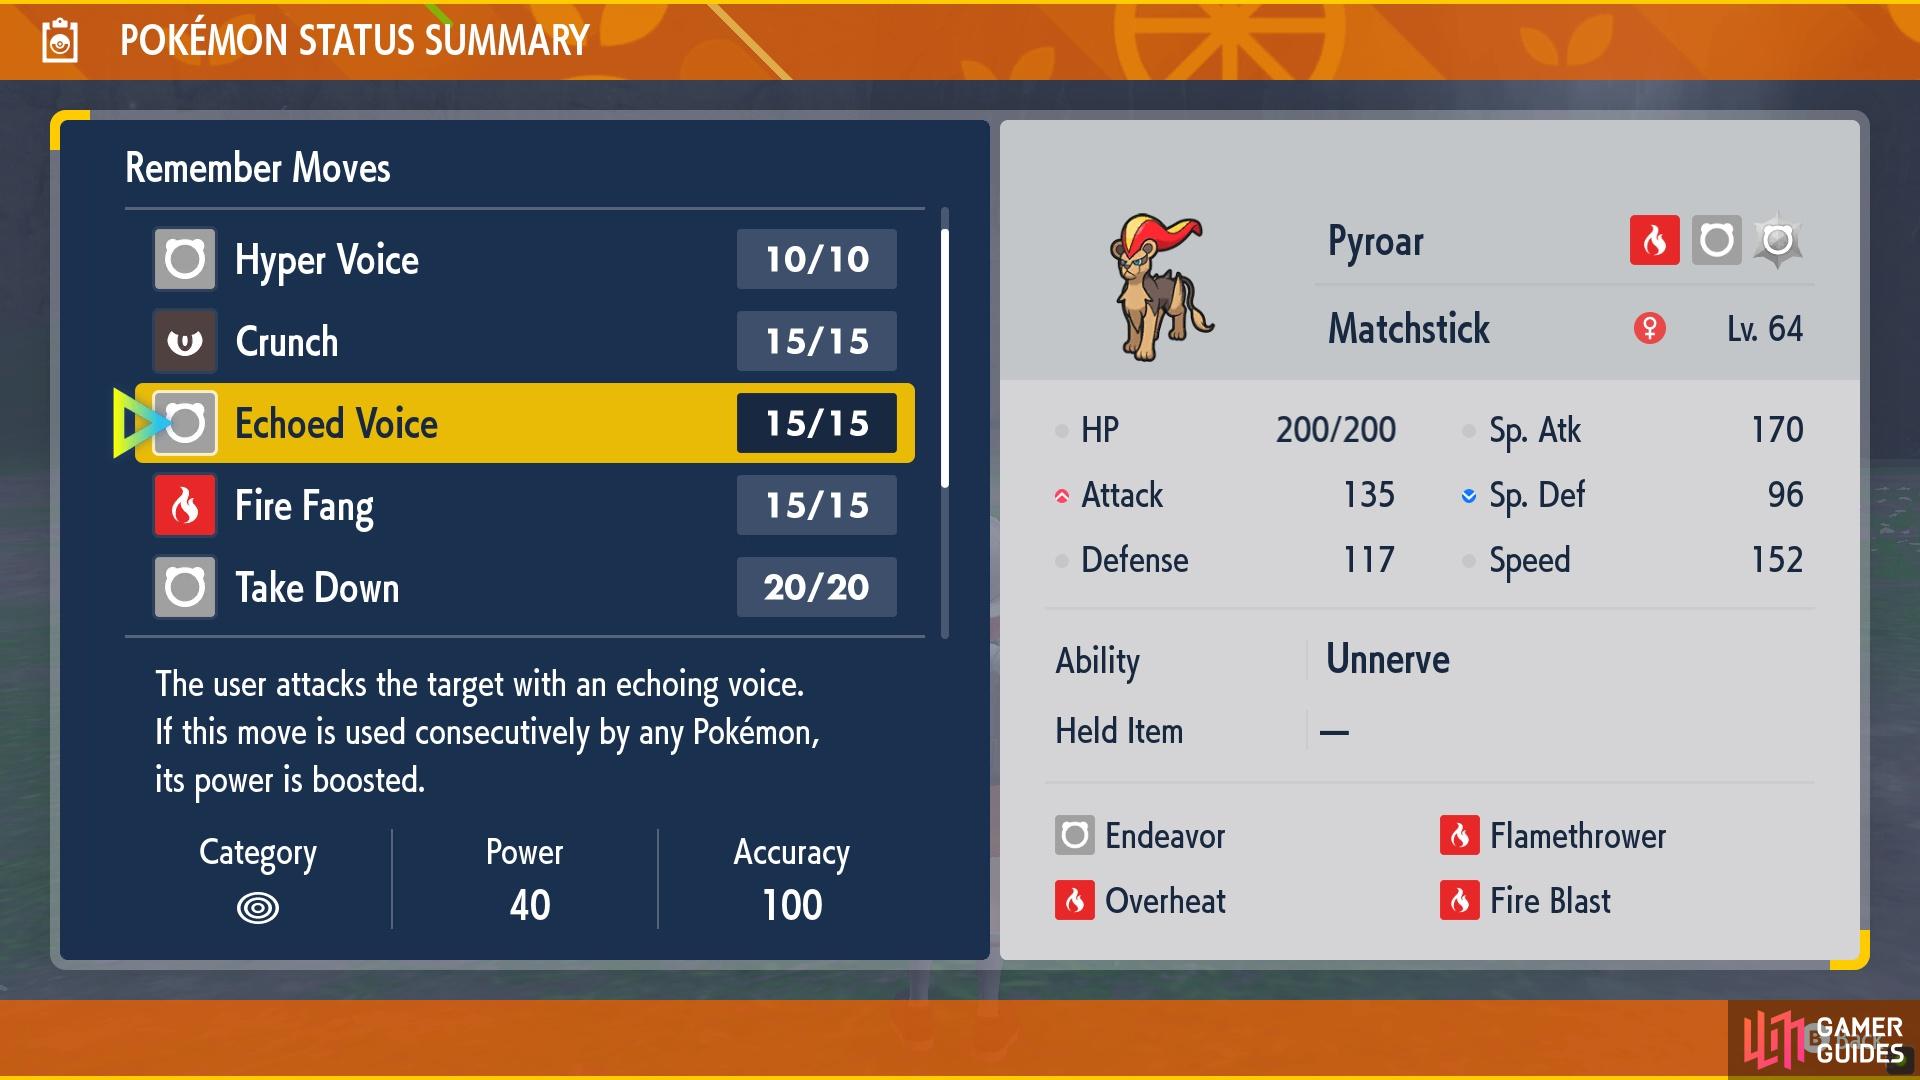 You can now switch between all the moves that your Pokémon knows and alter its moveset!